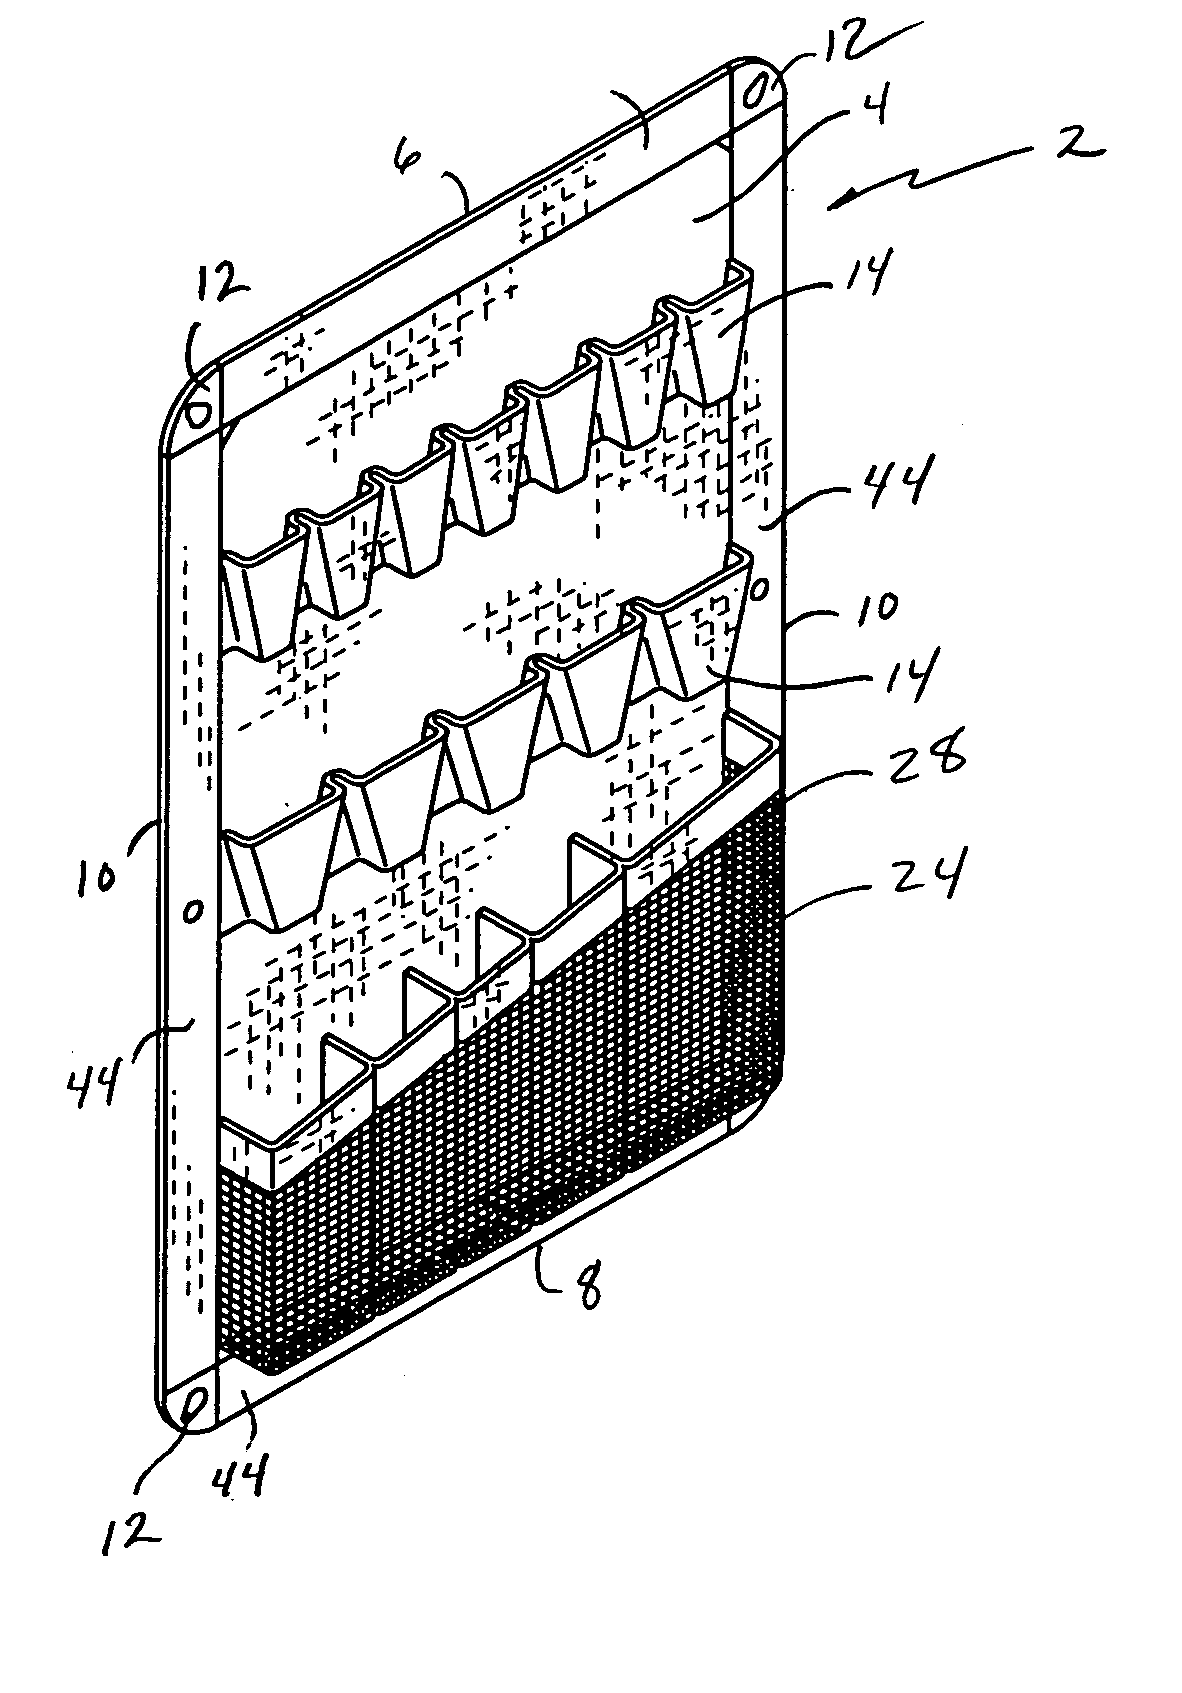 Flexible wall and ceiling storage and retention system